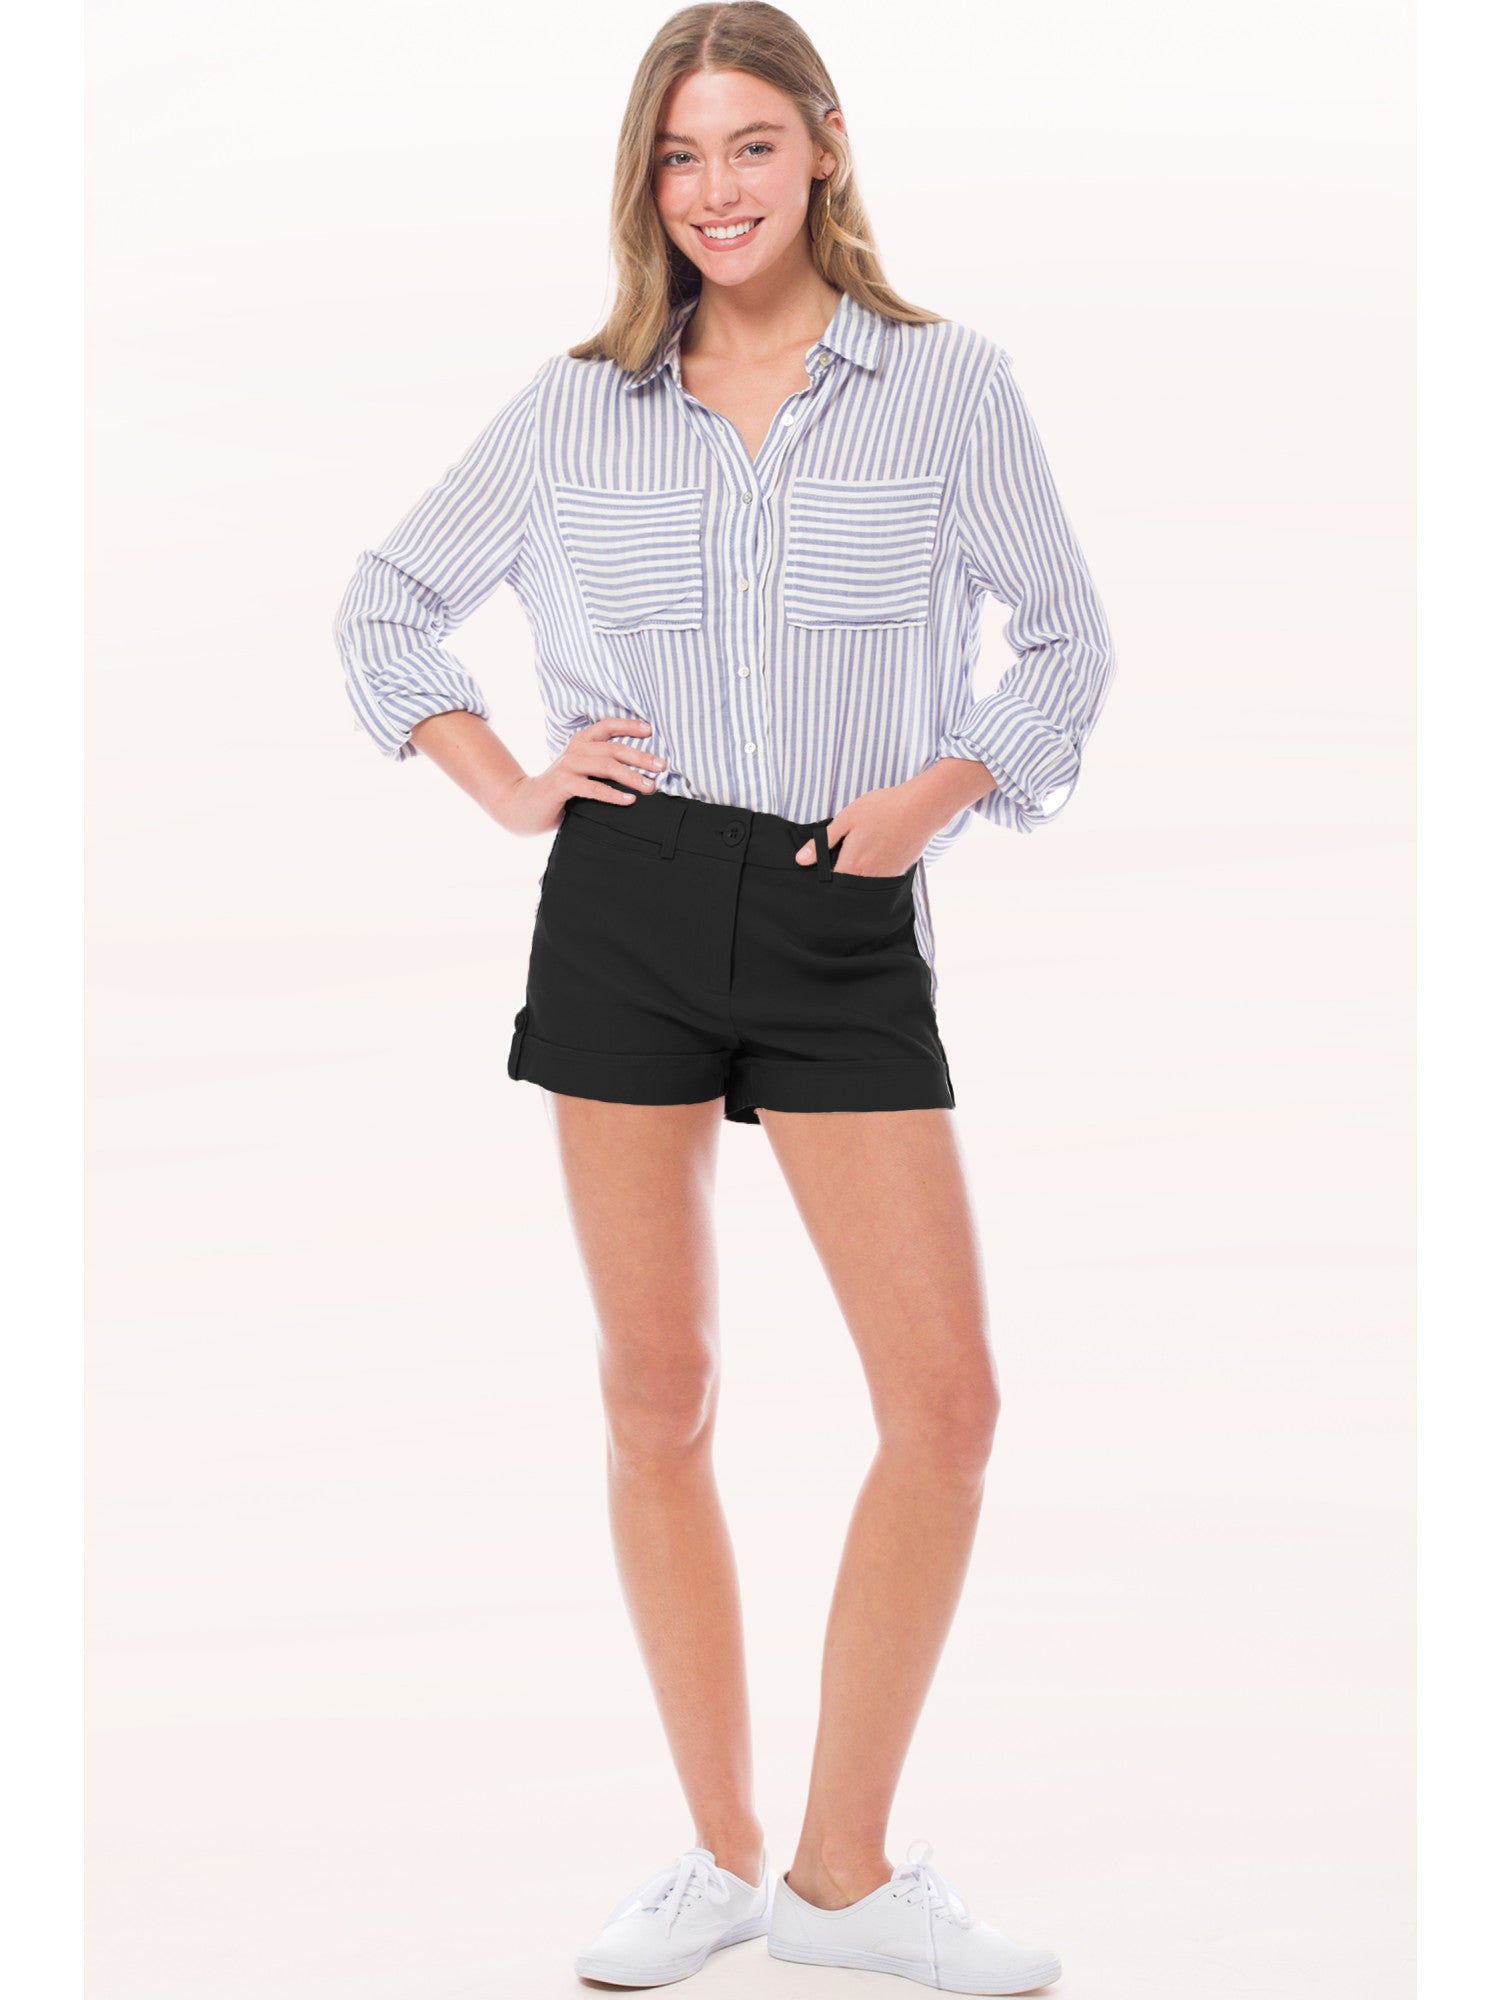 Mixmatchy Body Enhancing Comfort Modern City Cuffed Short with Pockets